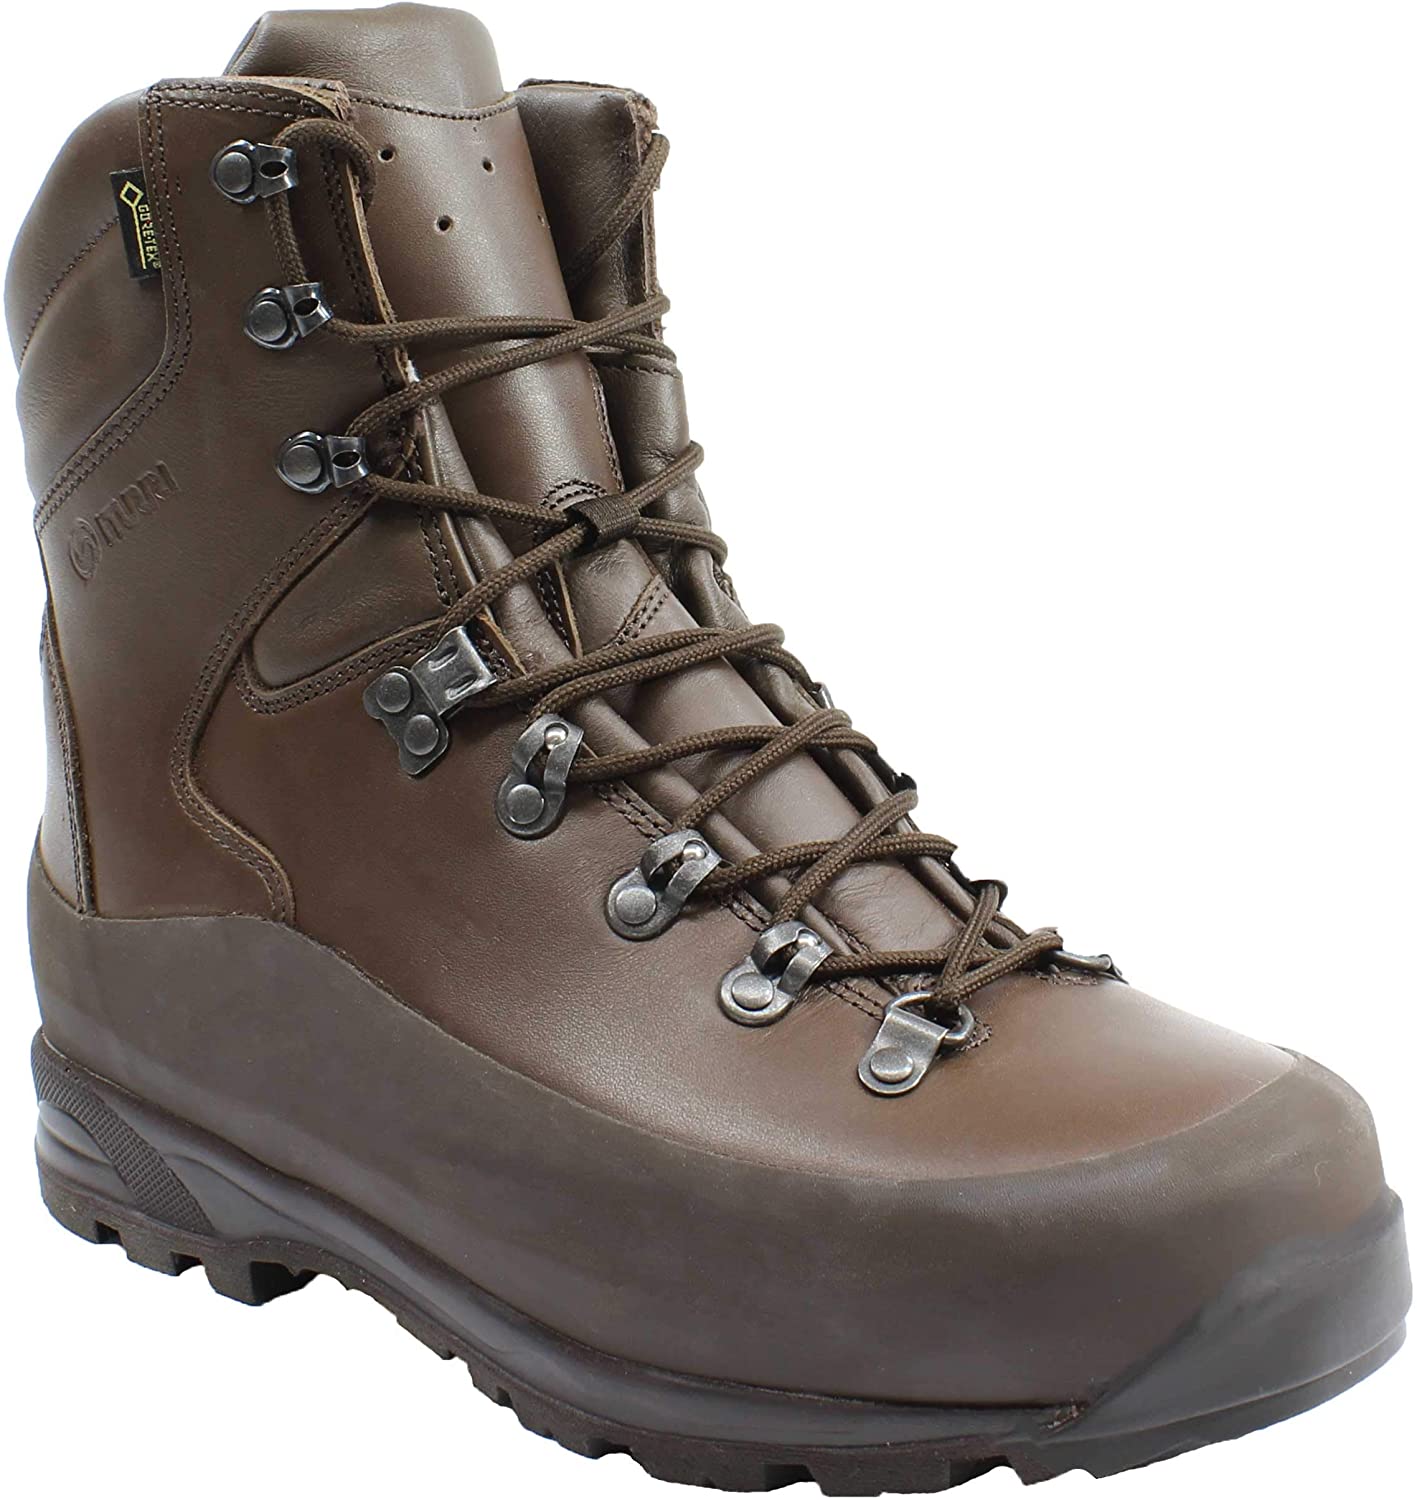 British Army ITURRI Cold Wet Weather Male Combat Boots - outdoors.ee